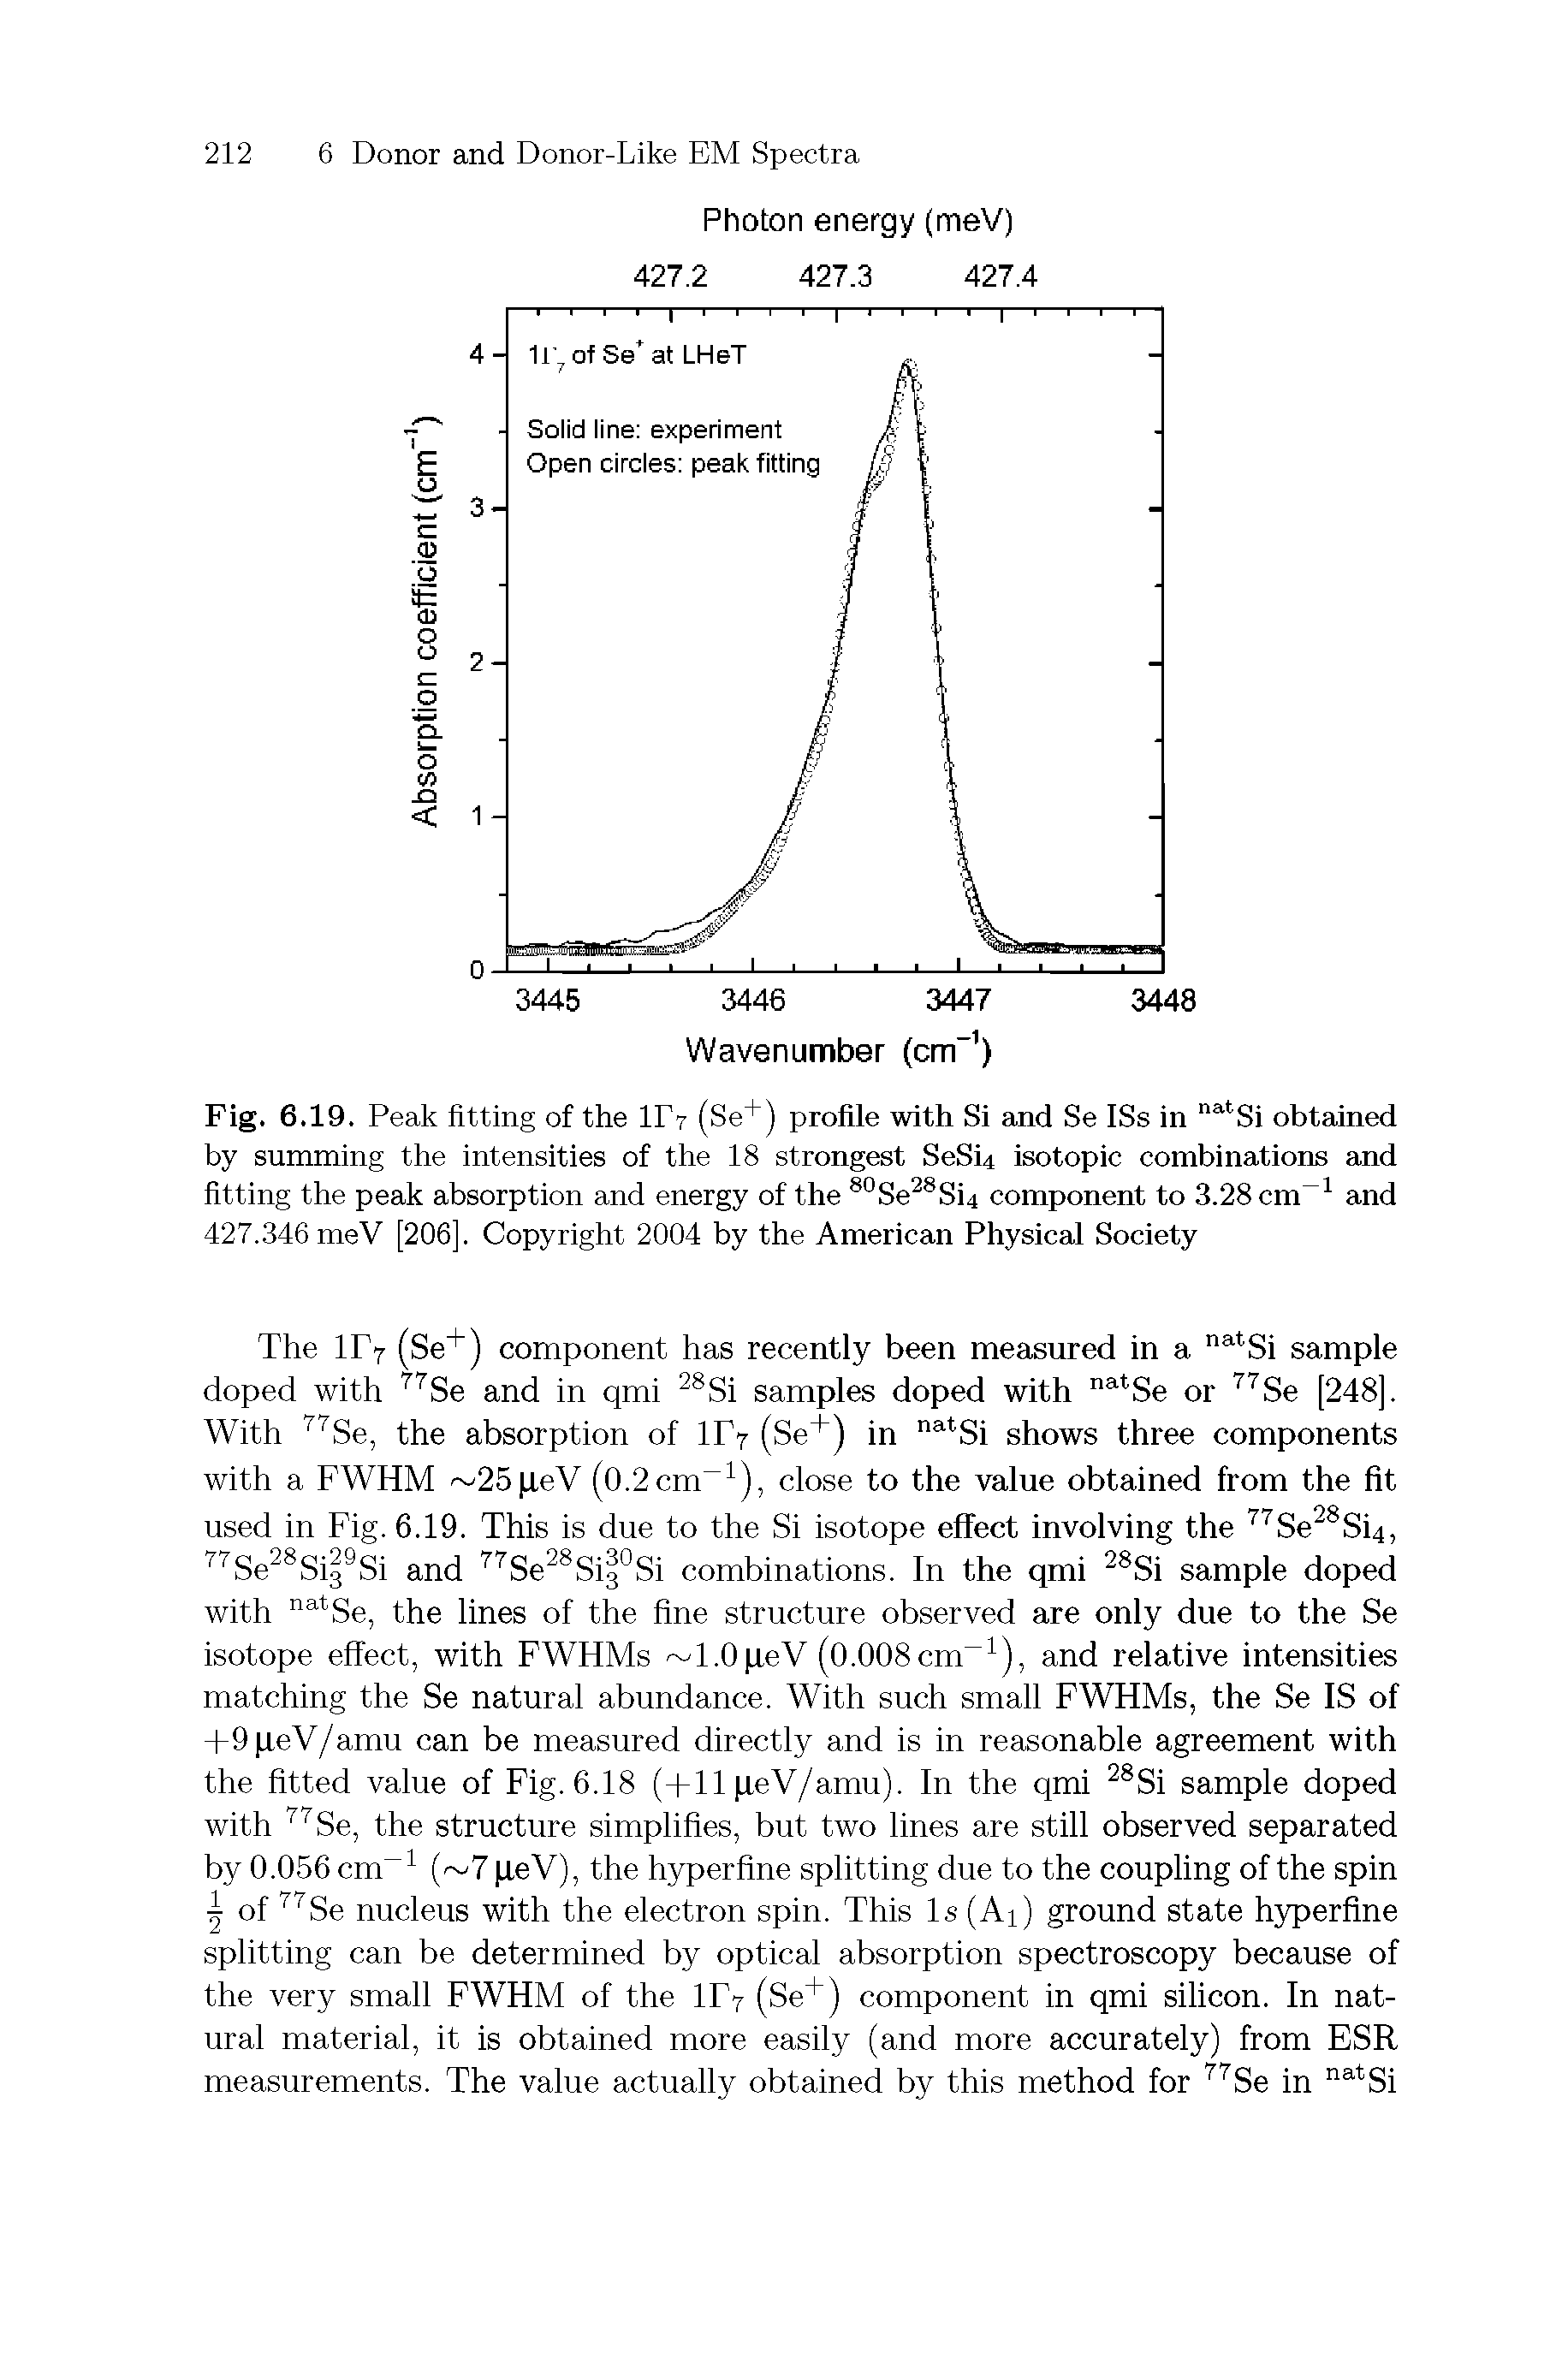 Fig. 6.19. Peak fitting of the 11 7 (Se+) profile with Si and Se ISs in natSi obtained by summing the intensities of the 18 strongest SeSi4 isotopic combinations and fitting the peak absorption and energy of the 80Se28Si4 component to 3.28 cm-1 and 427.346 meV [206], Copyright 2004 by the American Physical Society...